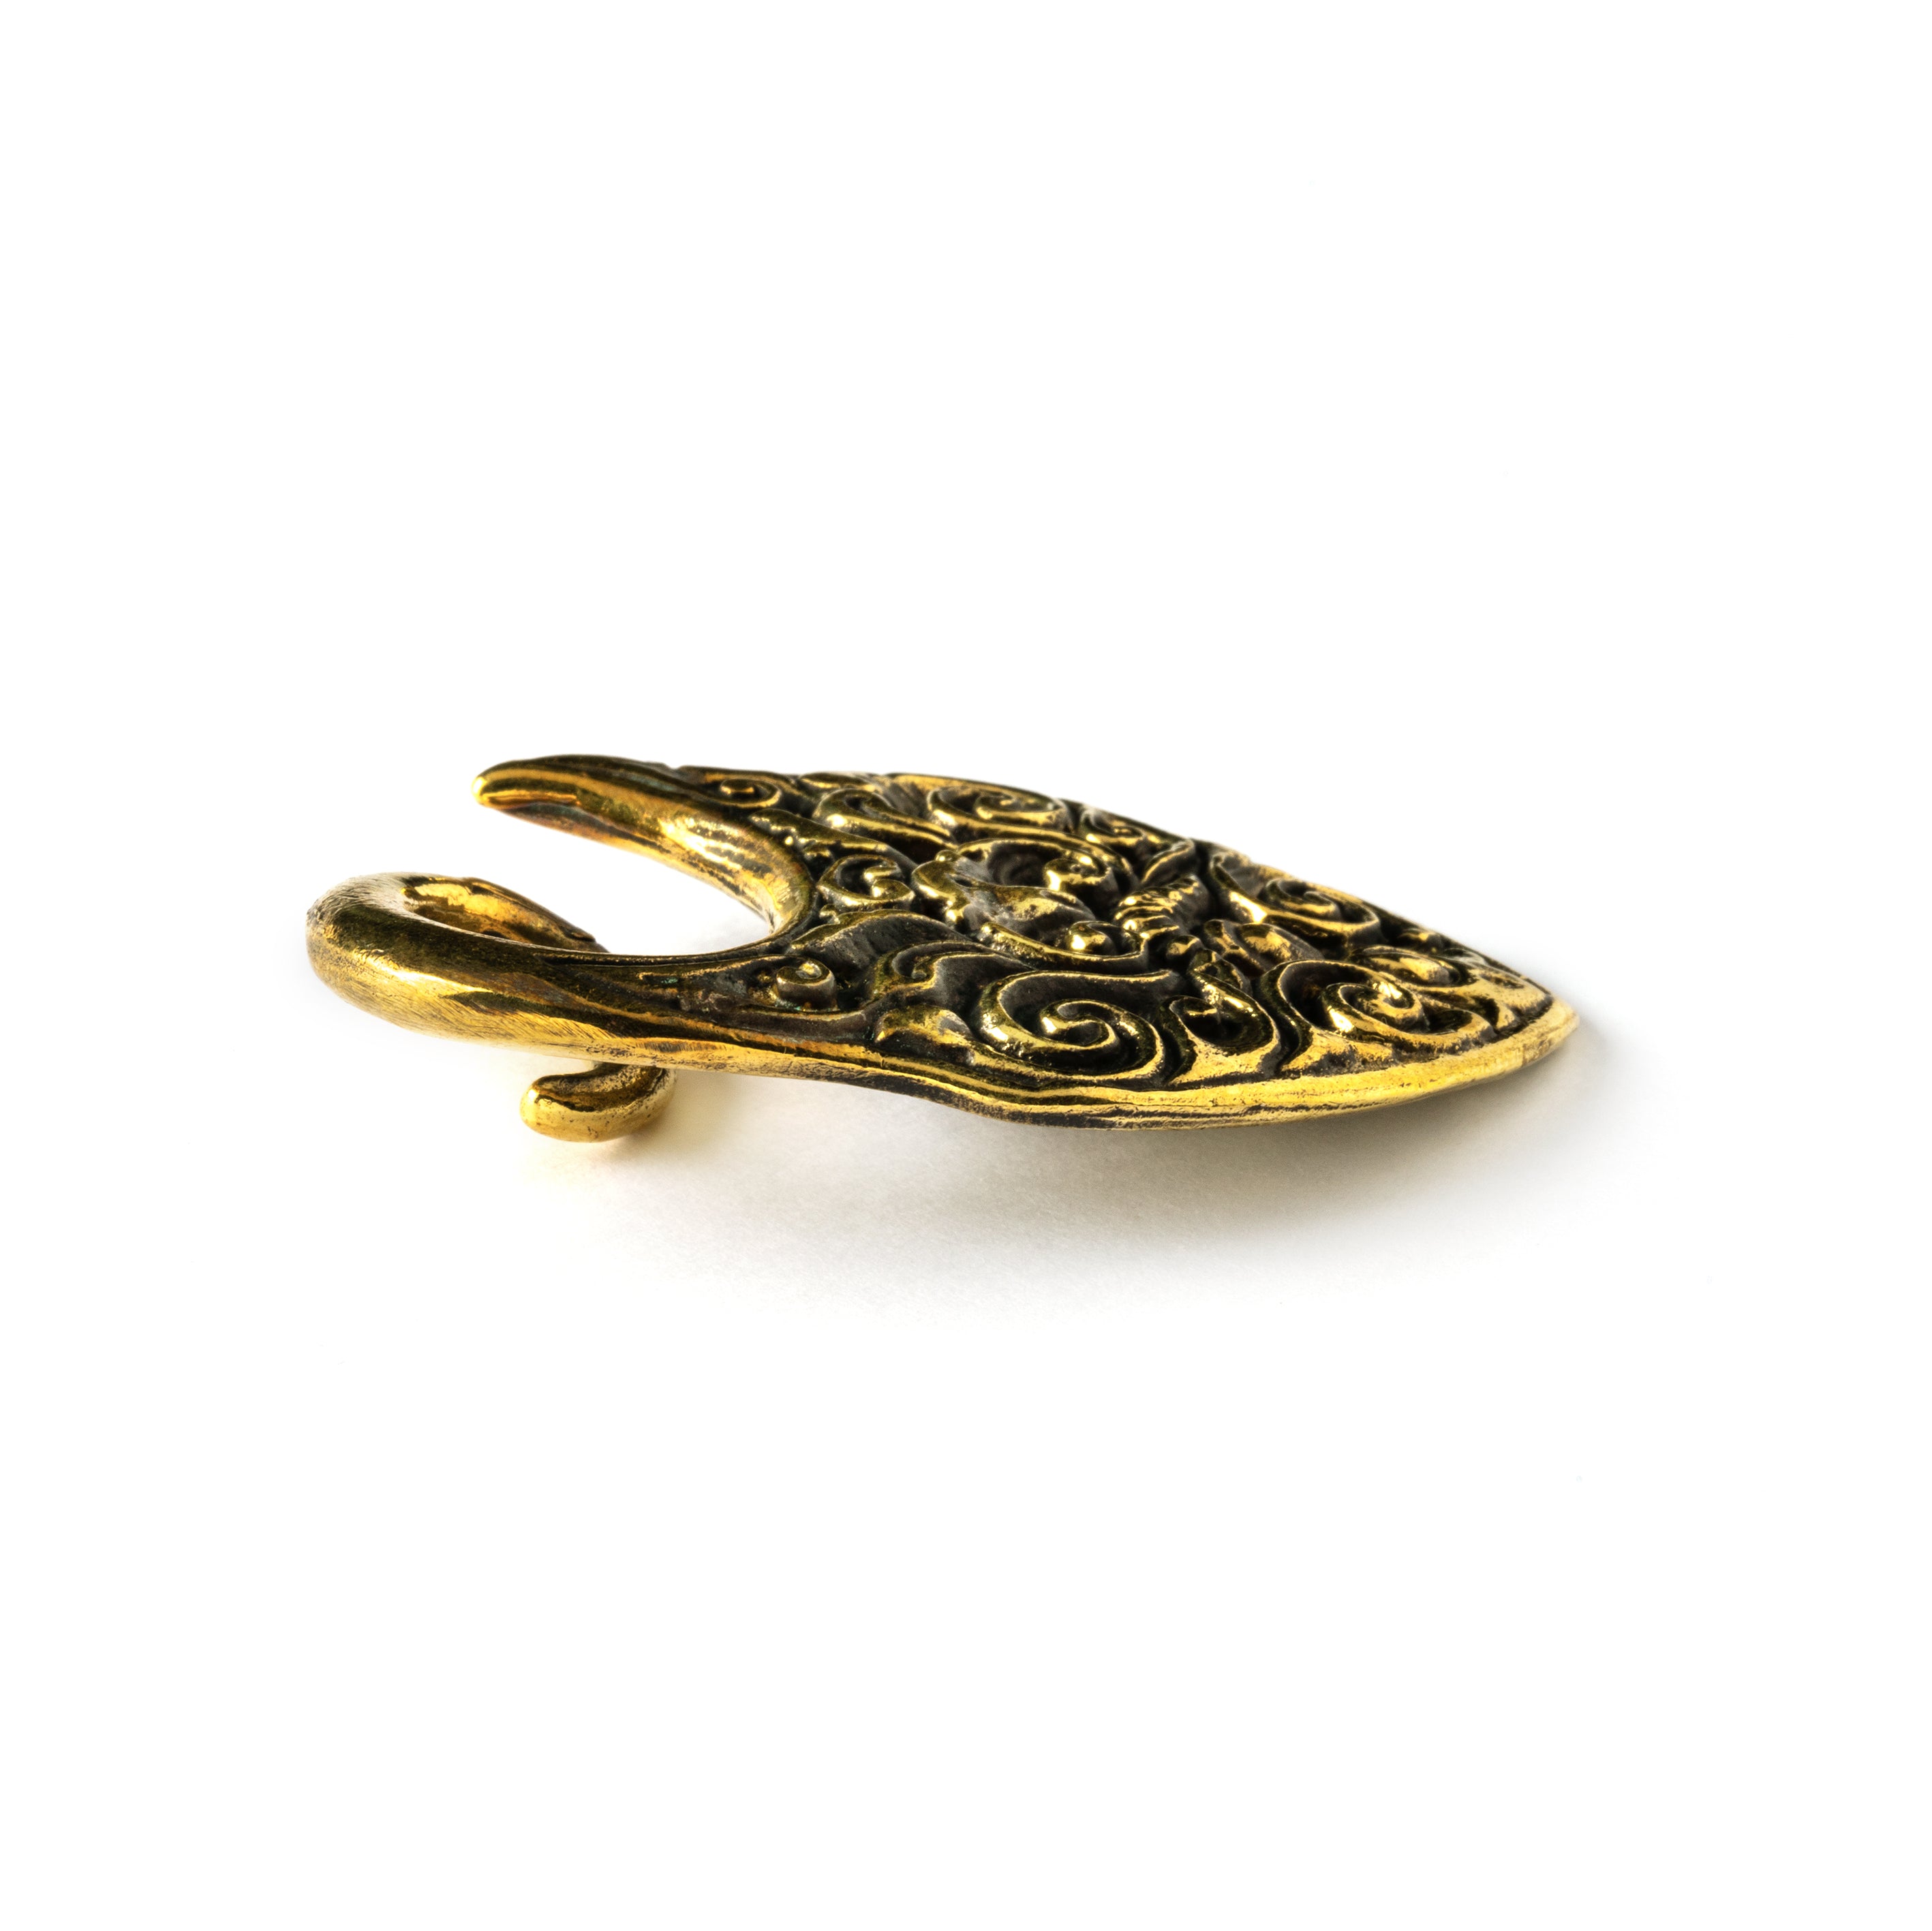 single golden ear weight hanger with victorian floral ornaments side view